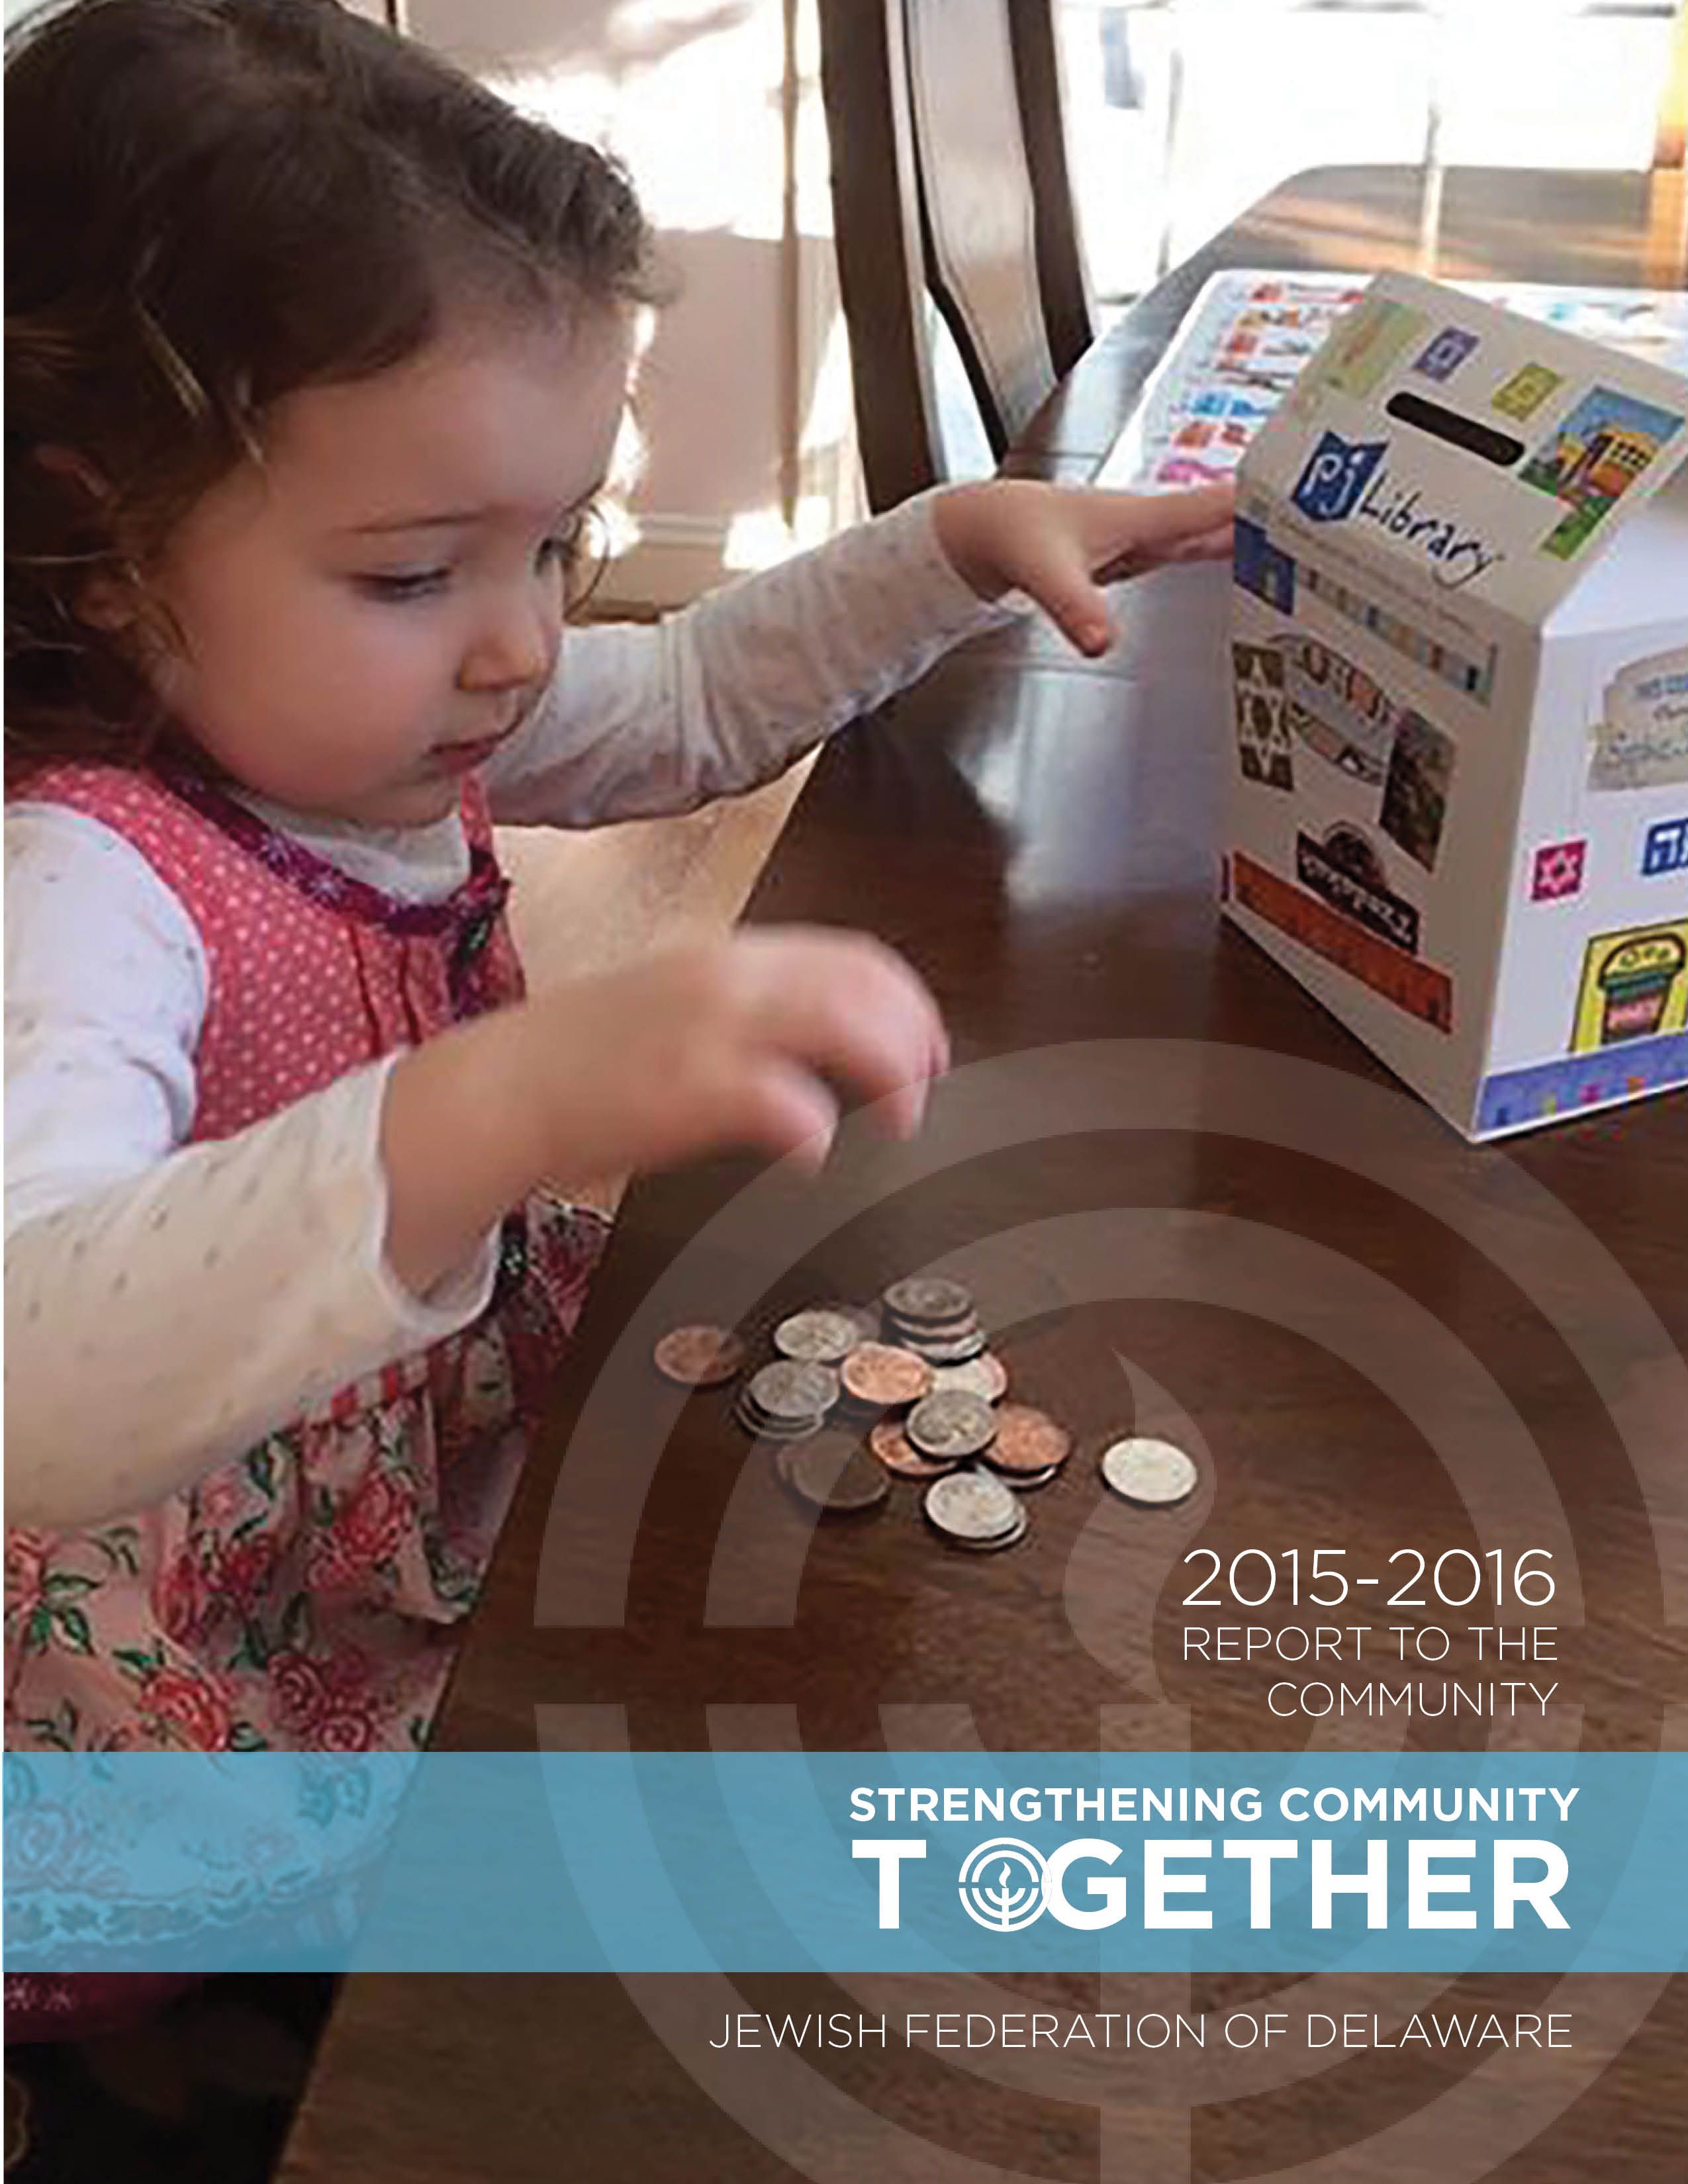 Click HERE to view the 2015-2016 Report to the Community